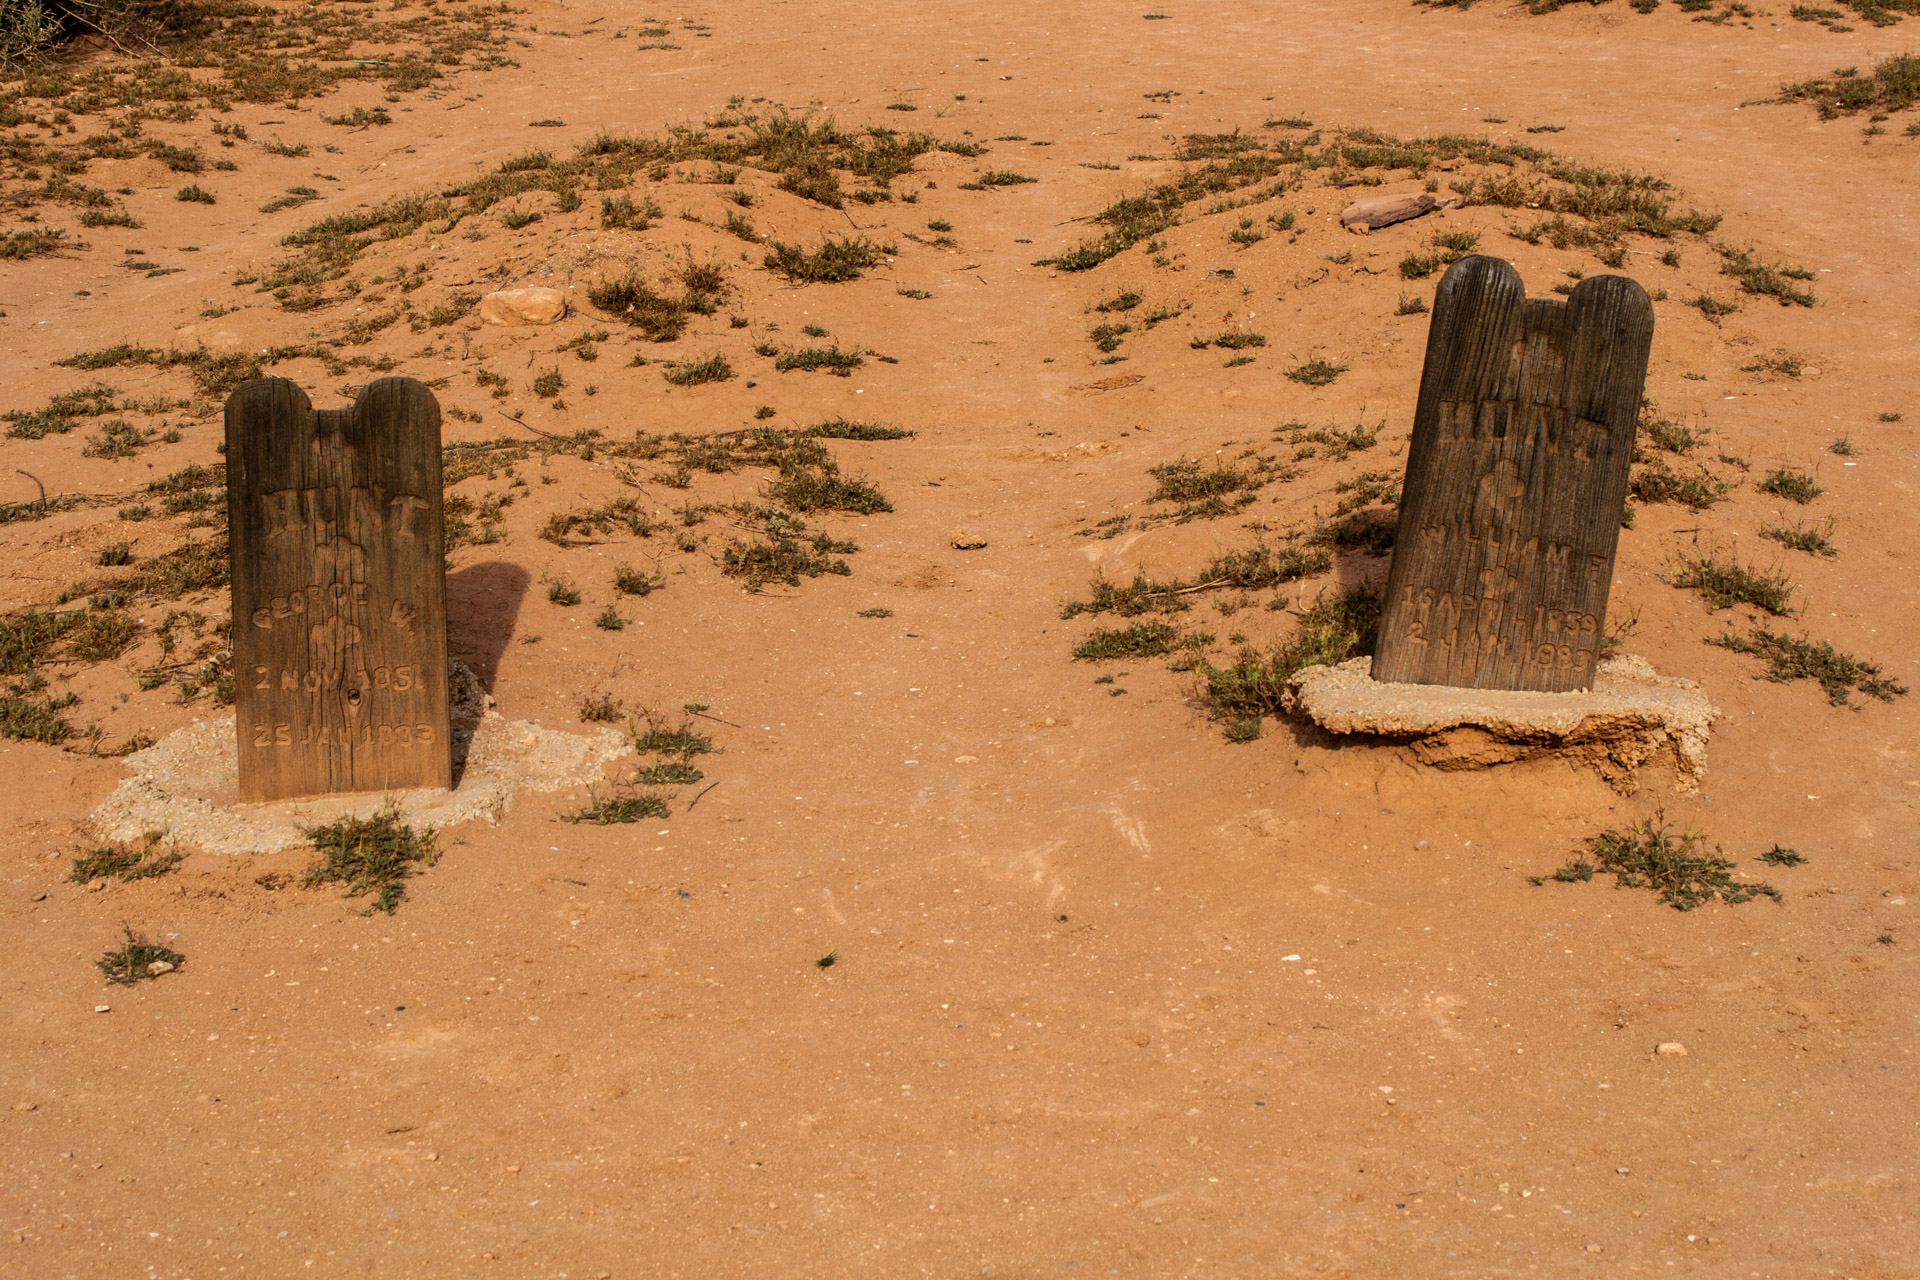 A Desert Ghost Town Cemetery (two old stones)